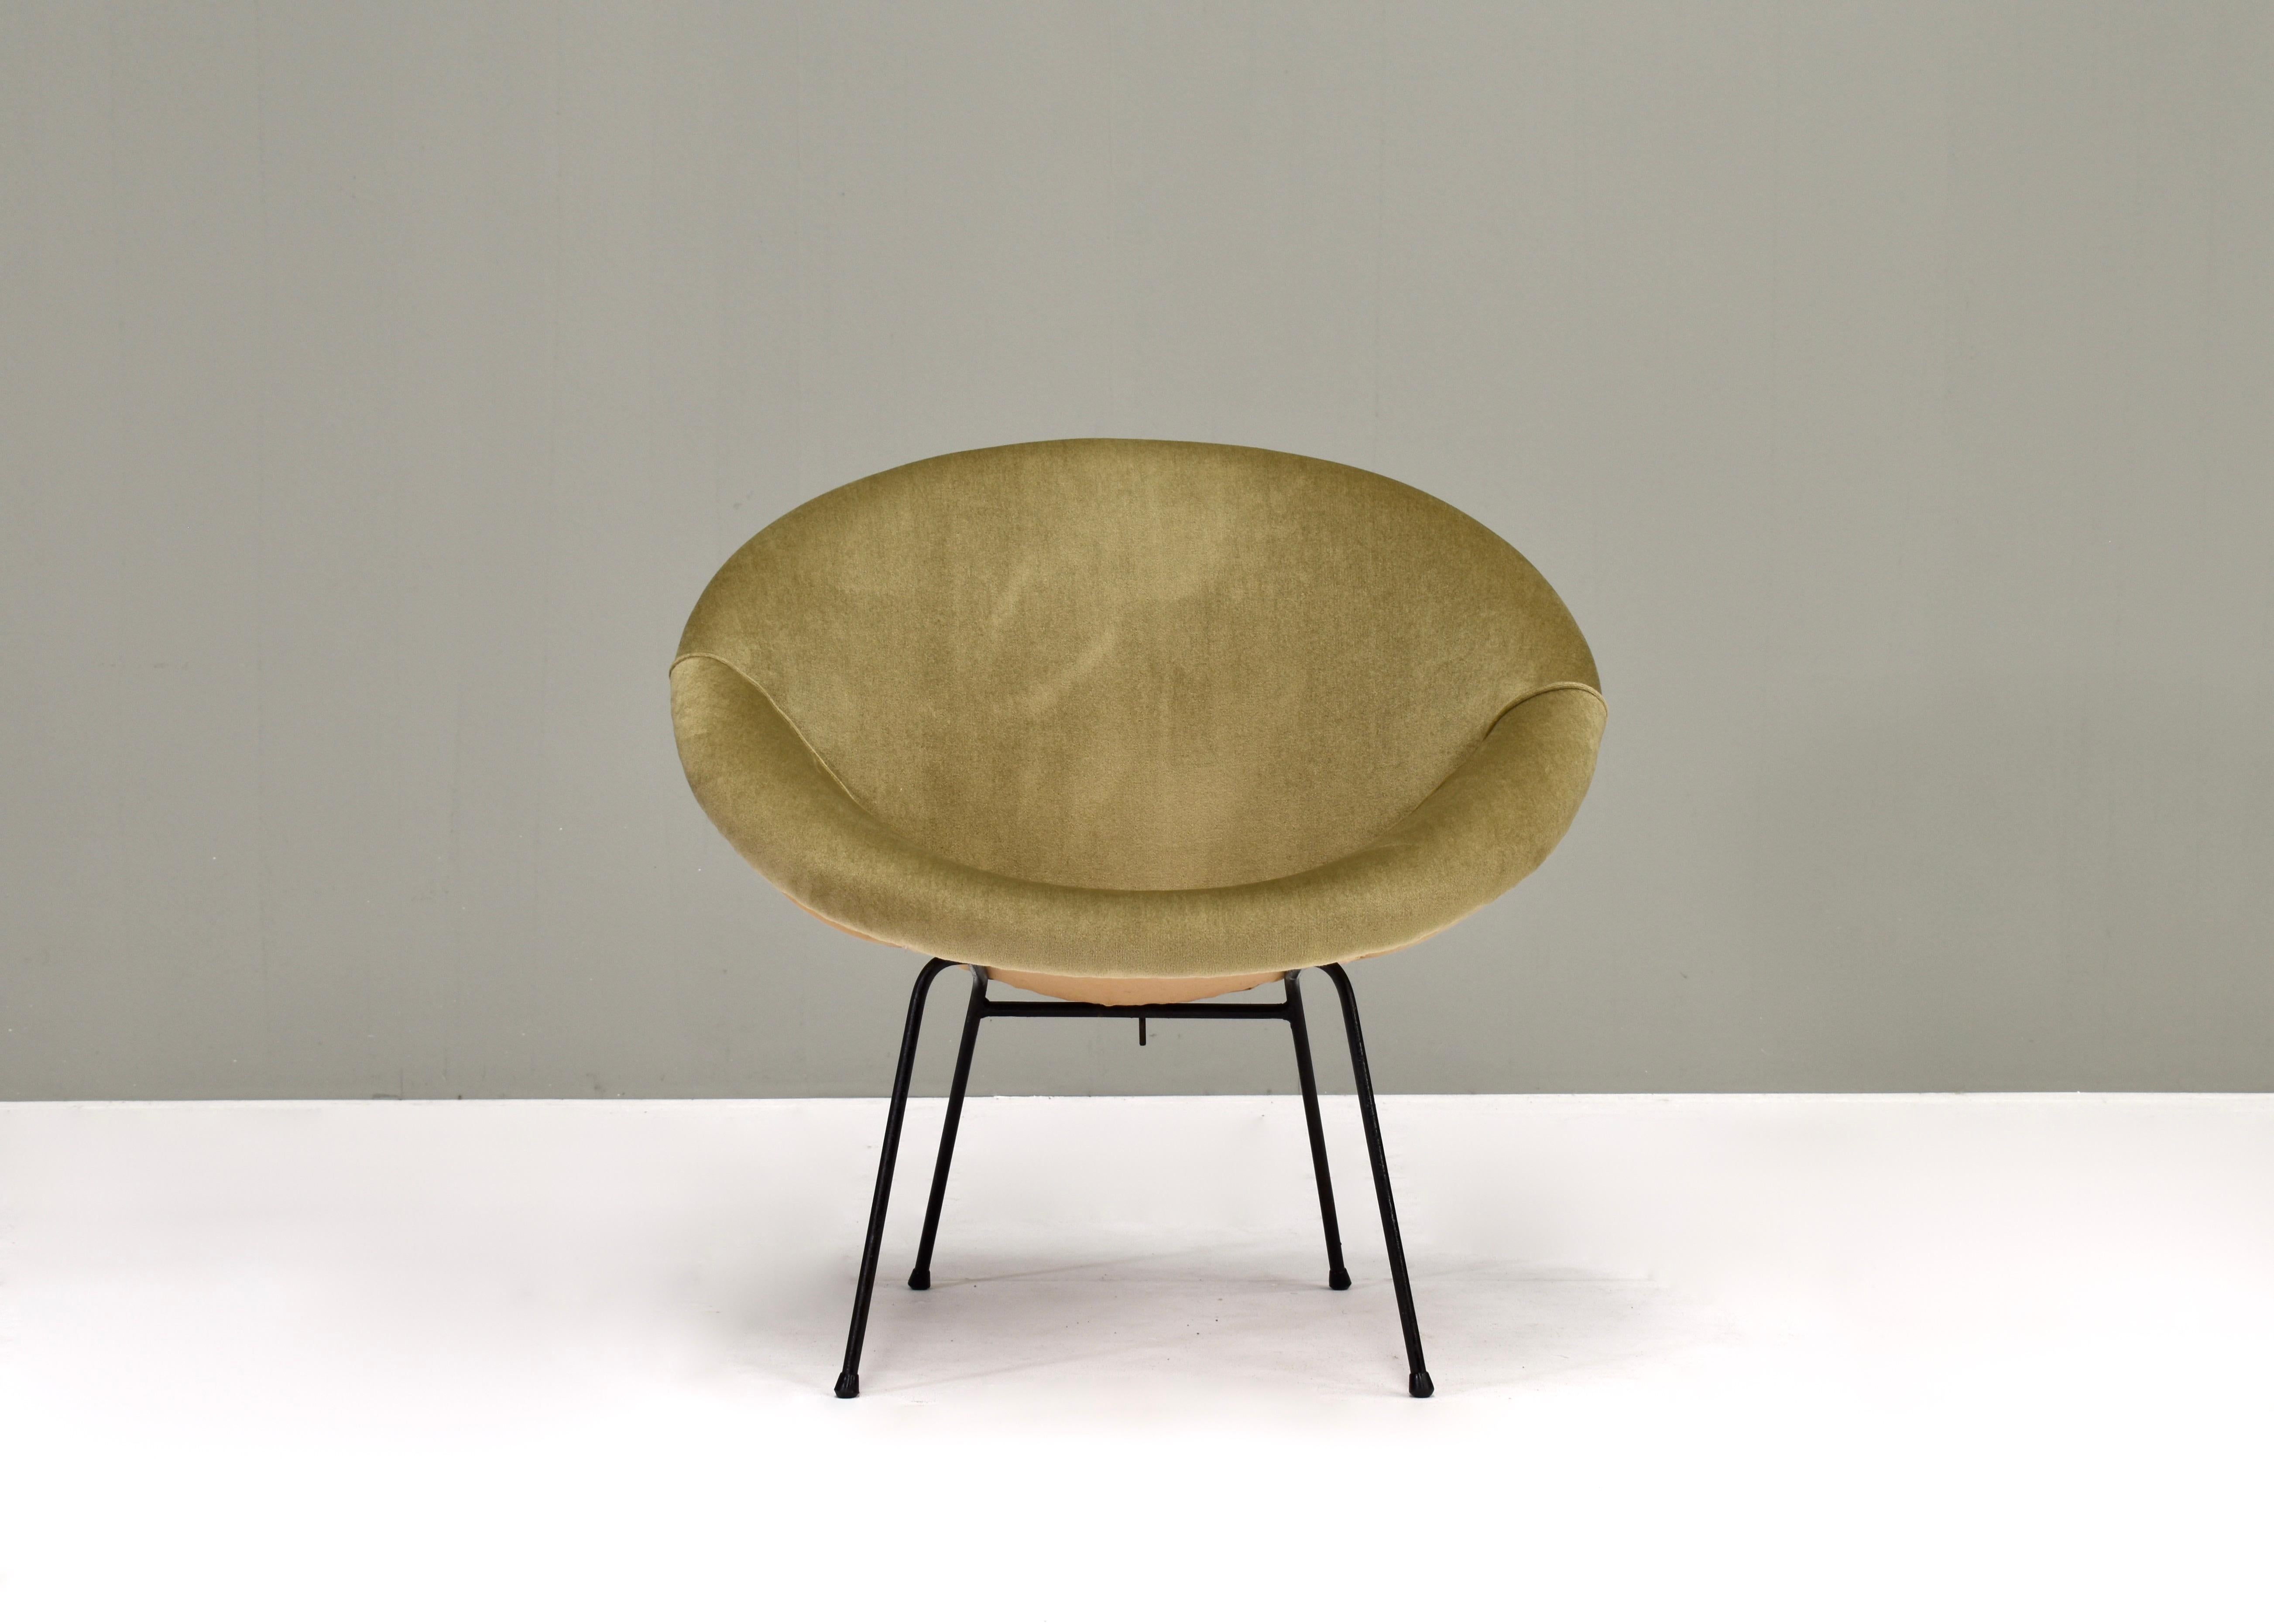 1950’s circle armchair in soft olive green velvet and black lacquered metal base.

Designer: Unknown
Manufacturer: Unknown
Country: Unknown 
Model: circle lounge chair
Design period: 1950’s
Date of manufacturing: 1950-60
Size wdh: 79x67x77